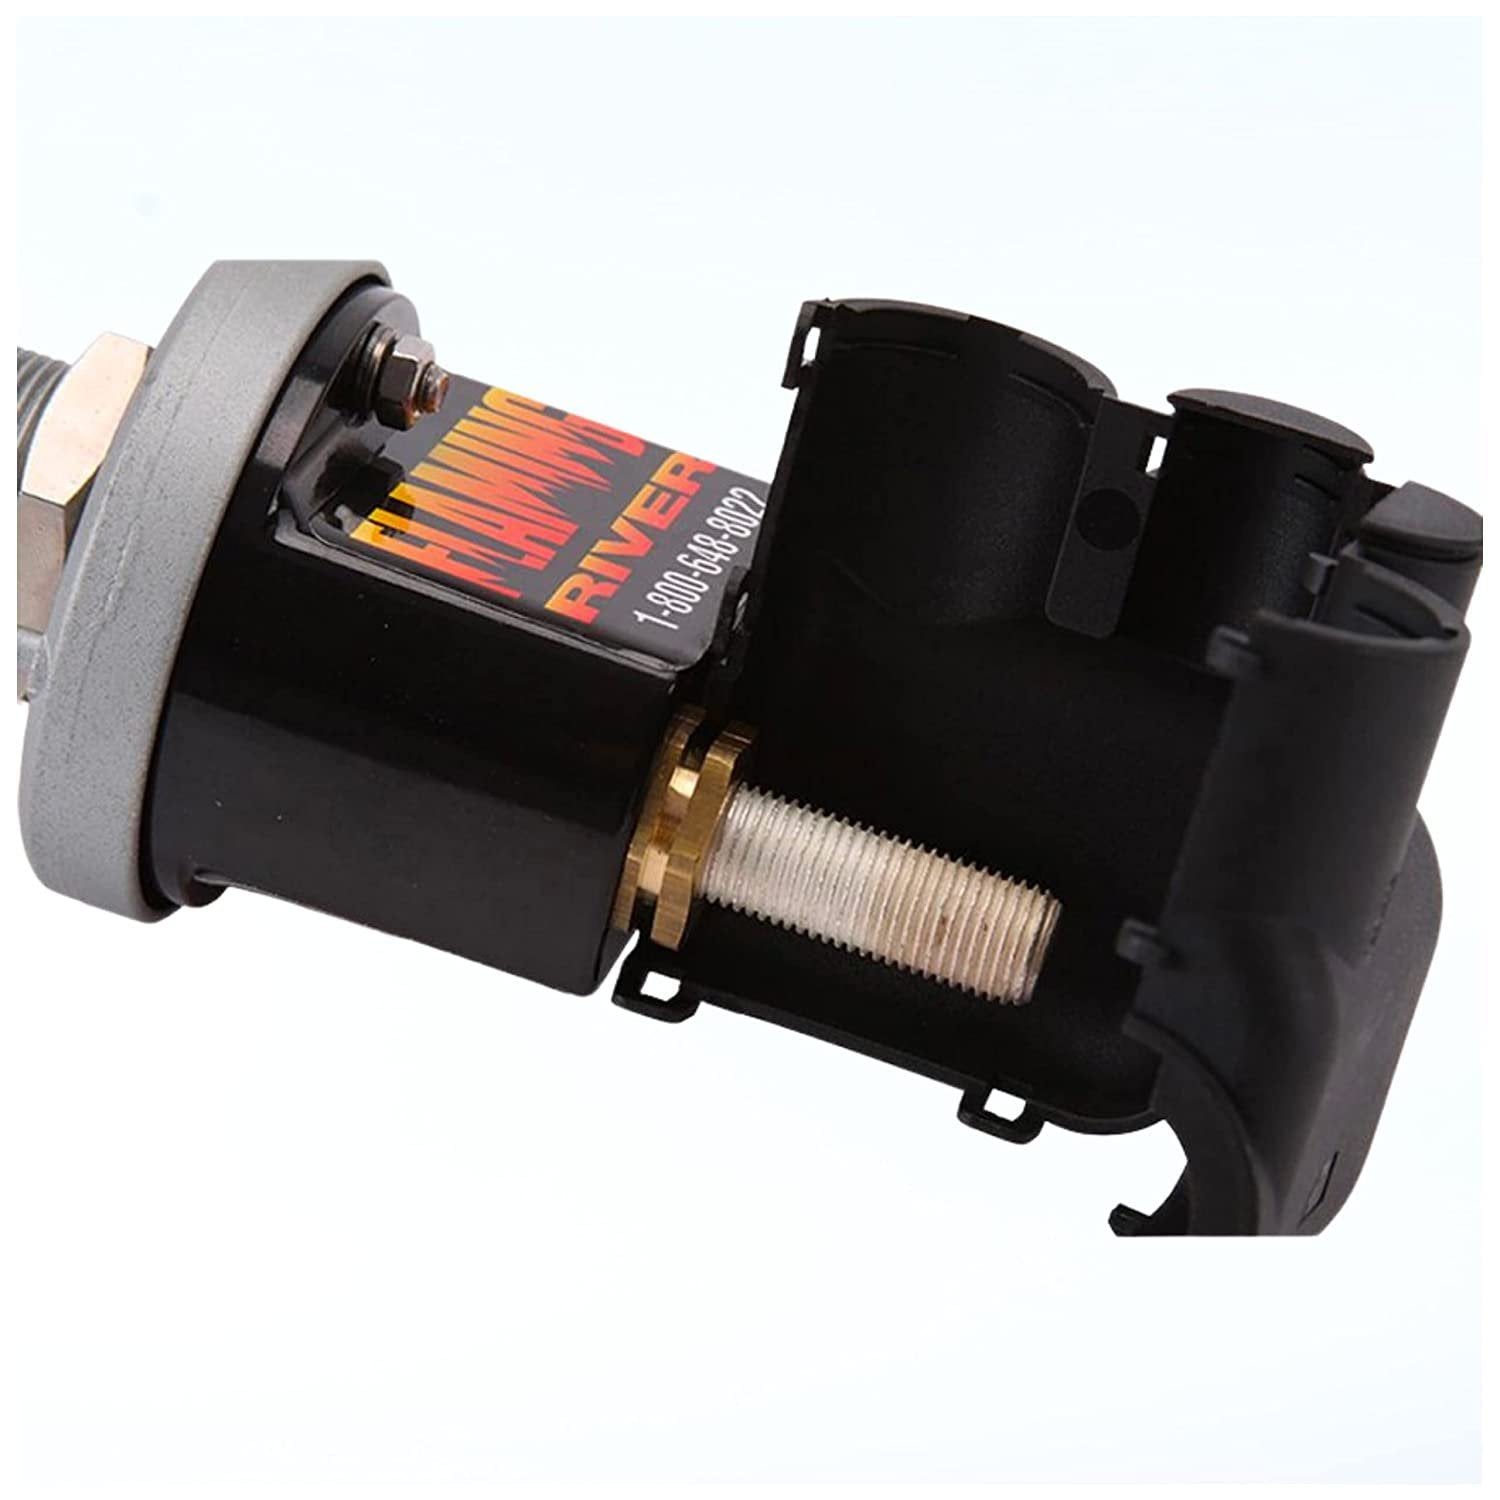 Flaming River Battery Disconnect Switch - Car Part FR1043 - American Made Heavy Duty HD AMP Switch with Terminal Covers and Lock-Out Bracket - for Large or Construction Vehicles with Bonus Key Chain